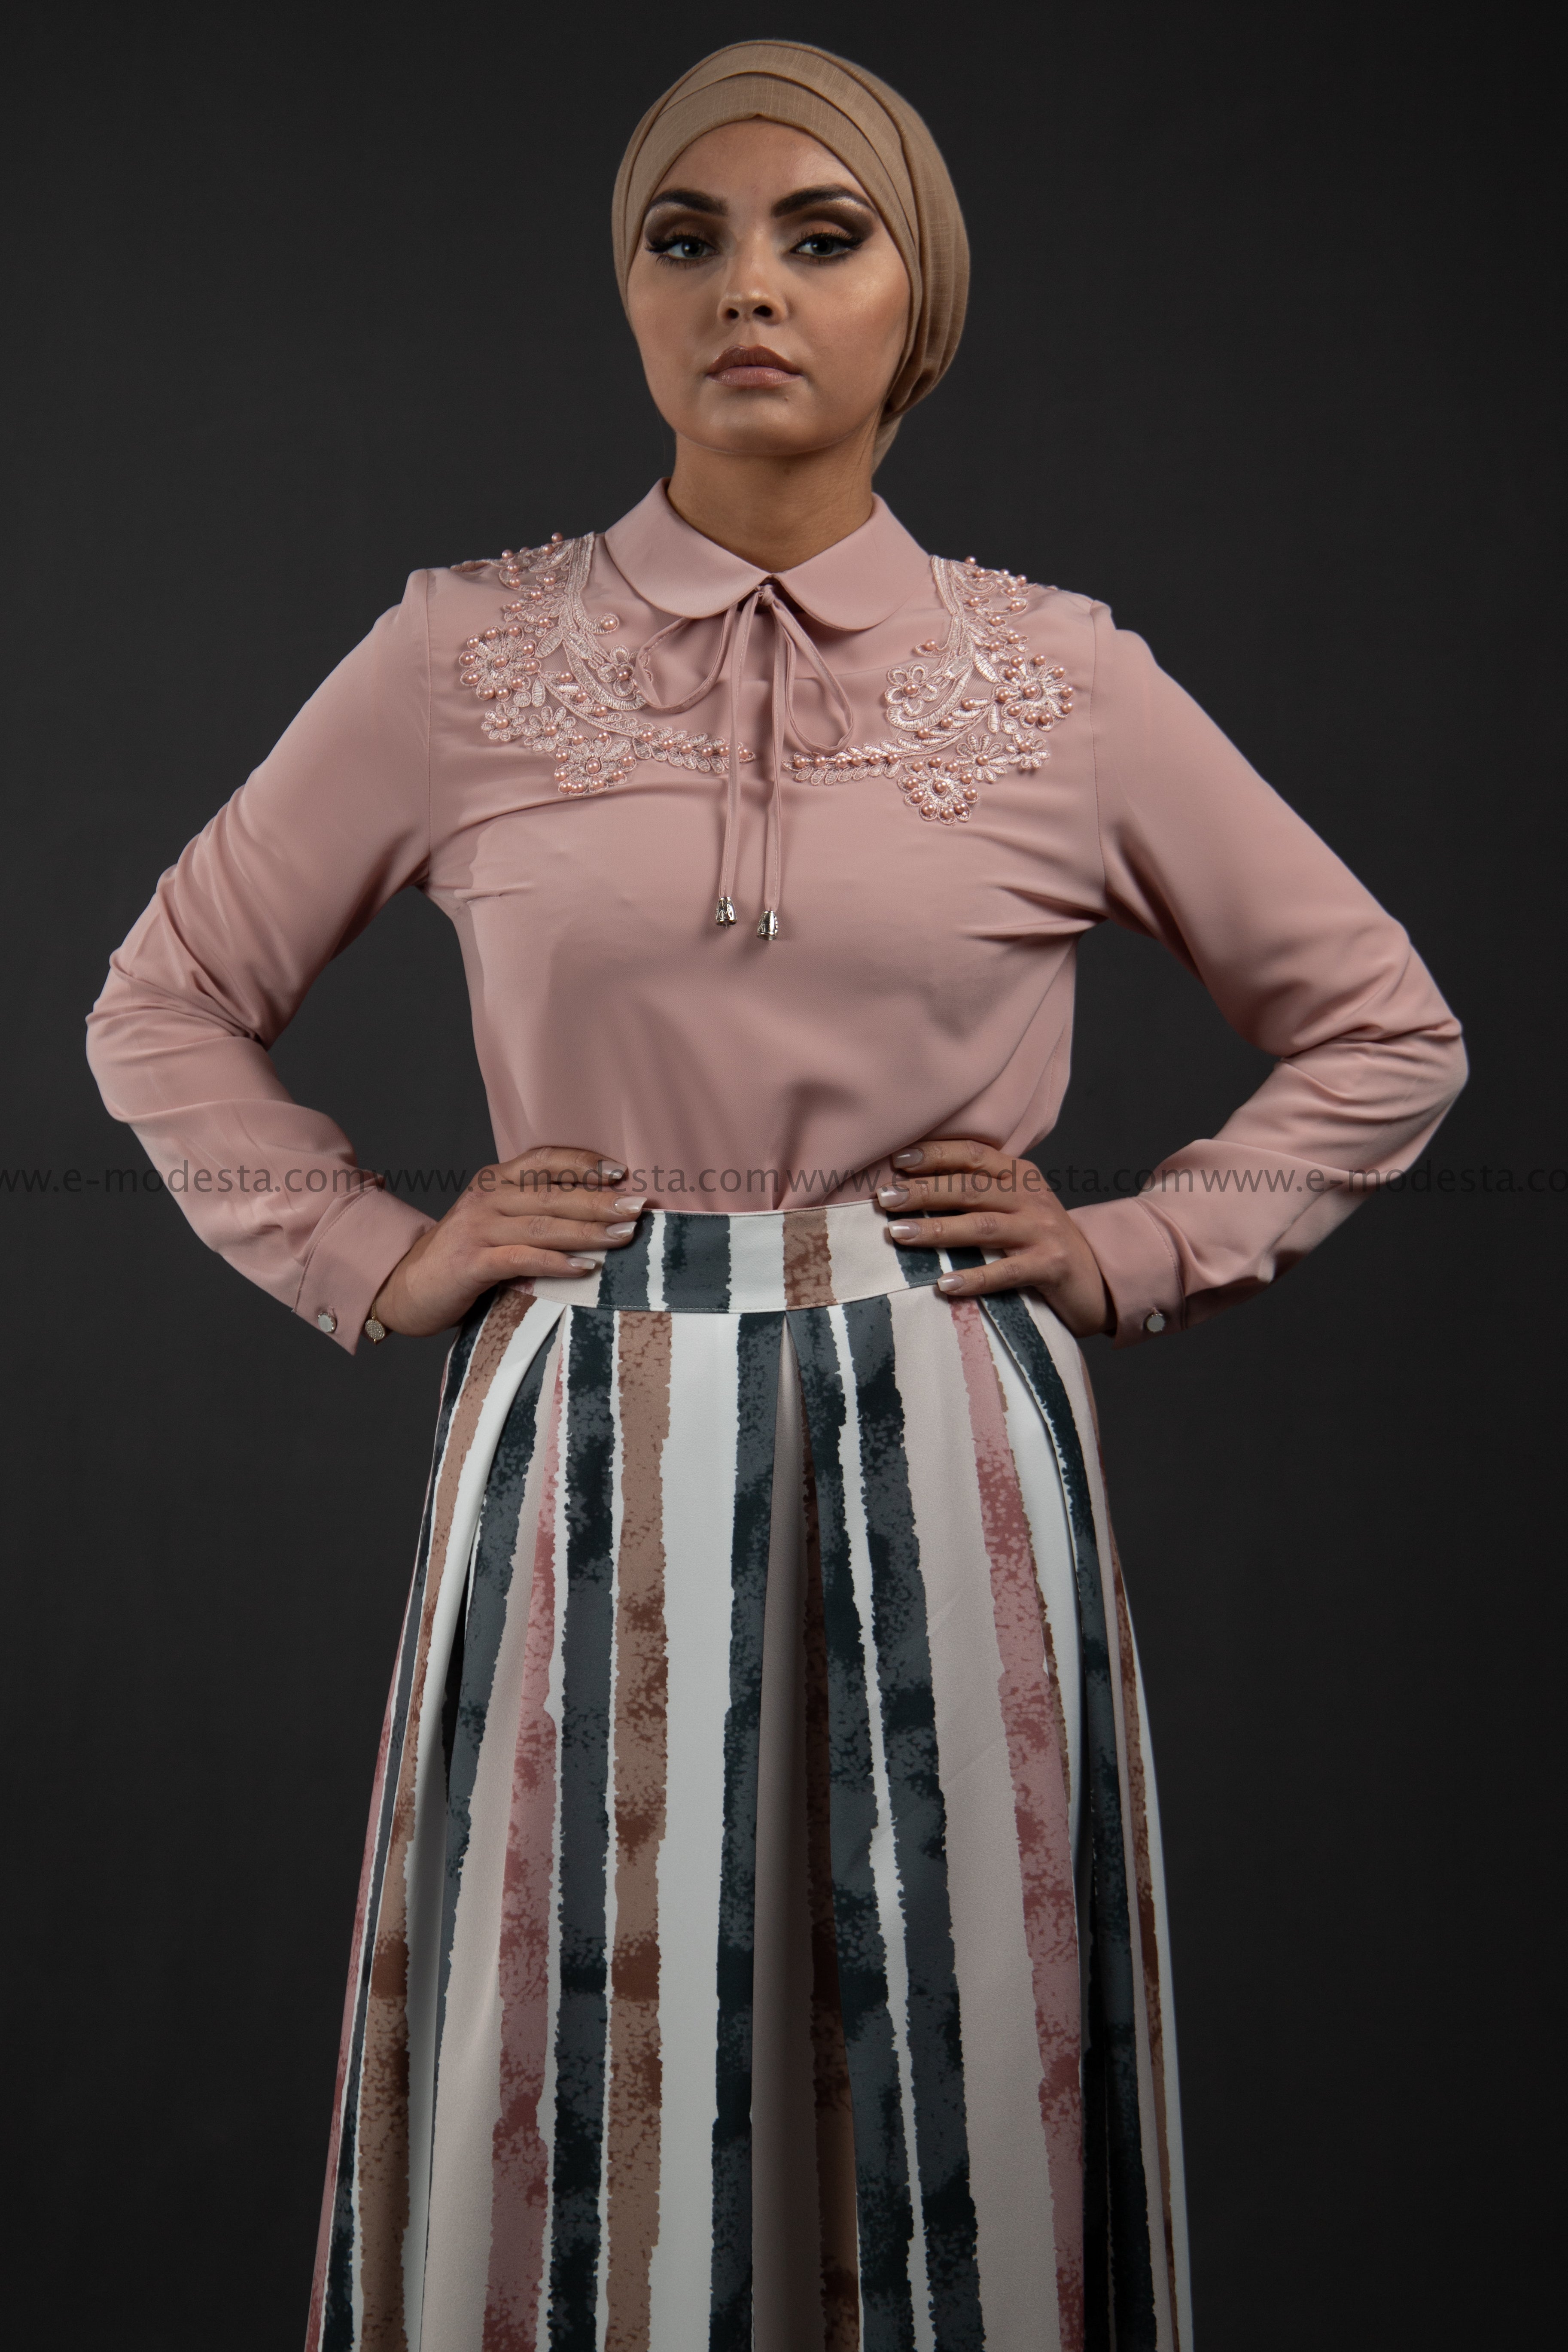 SALE Formal Pink Blouse | Lace & Pearls on the Shoulders - E-Modesta